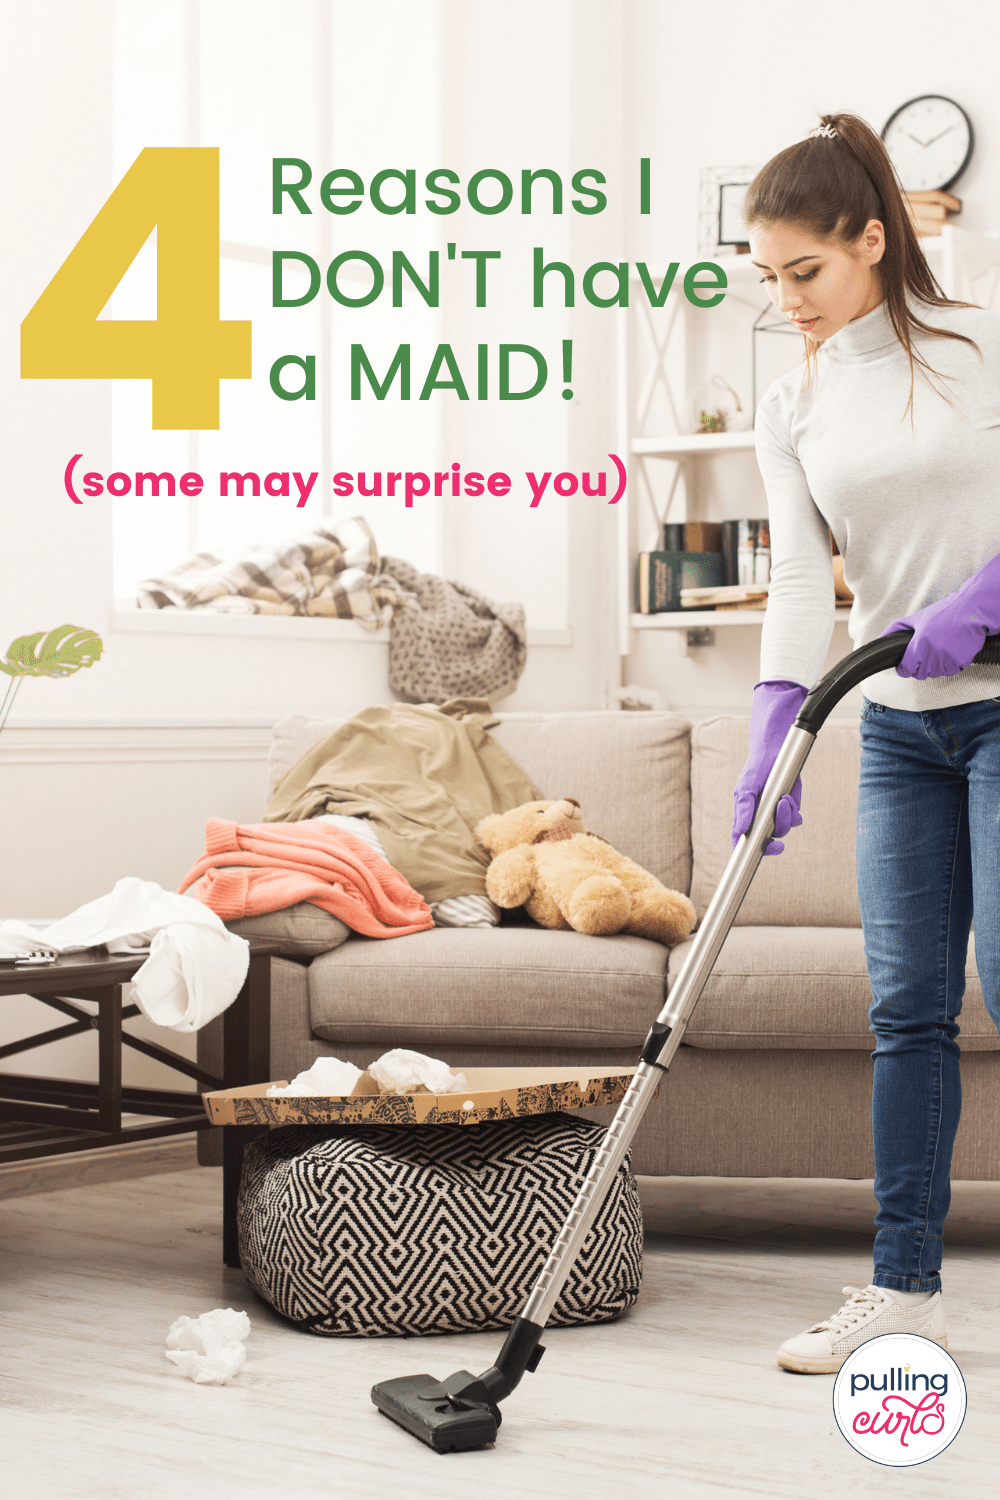 Is there a reason to NOT have a maid? via @pullingcurls